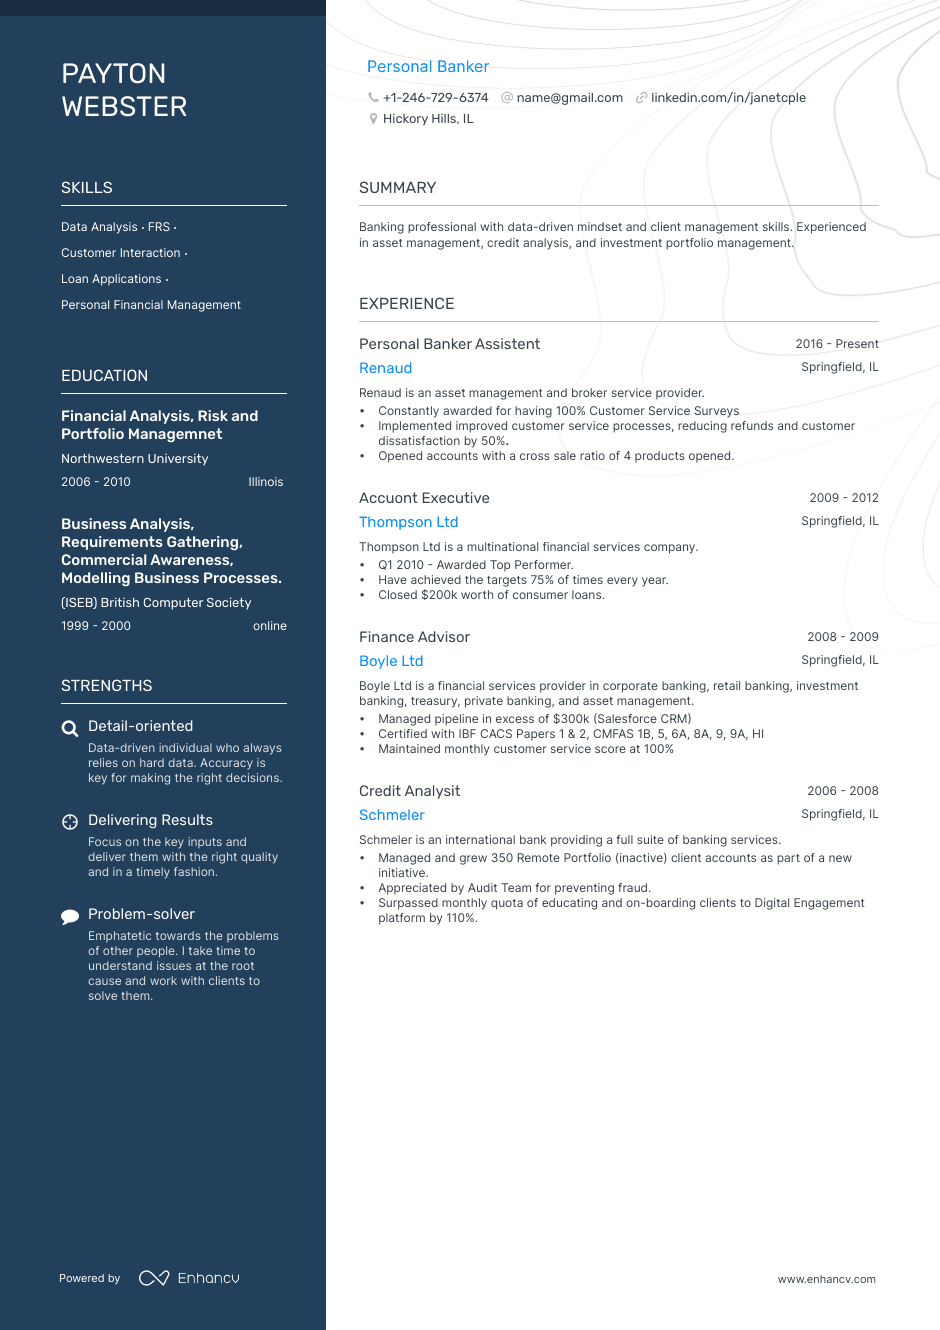 Personal Banker resume example